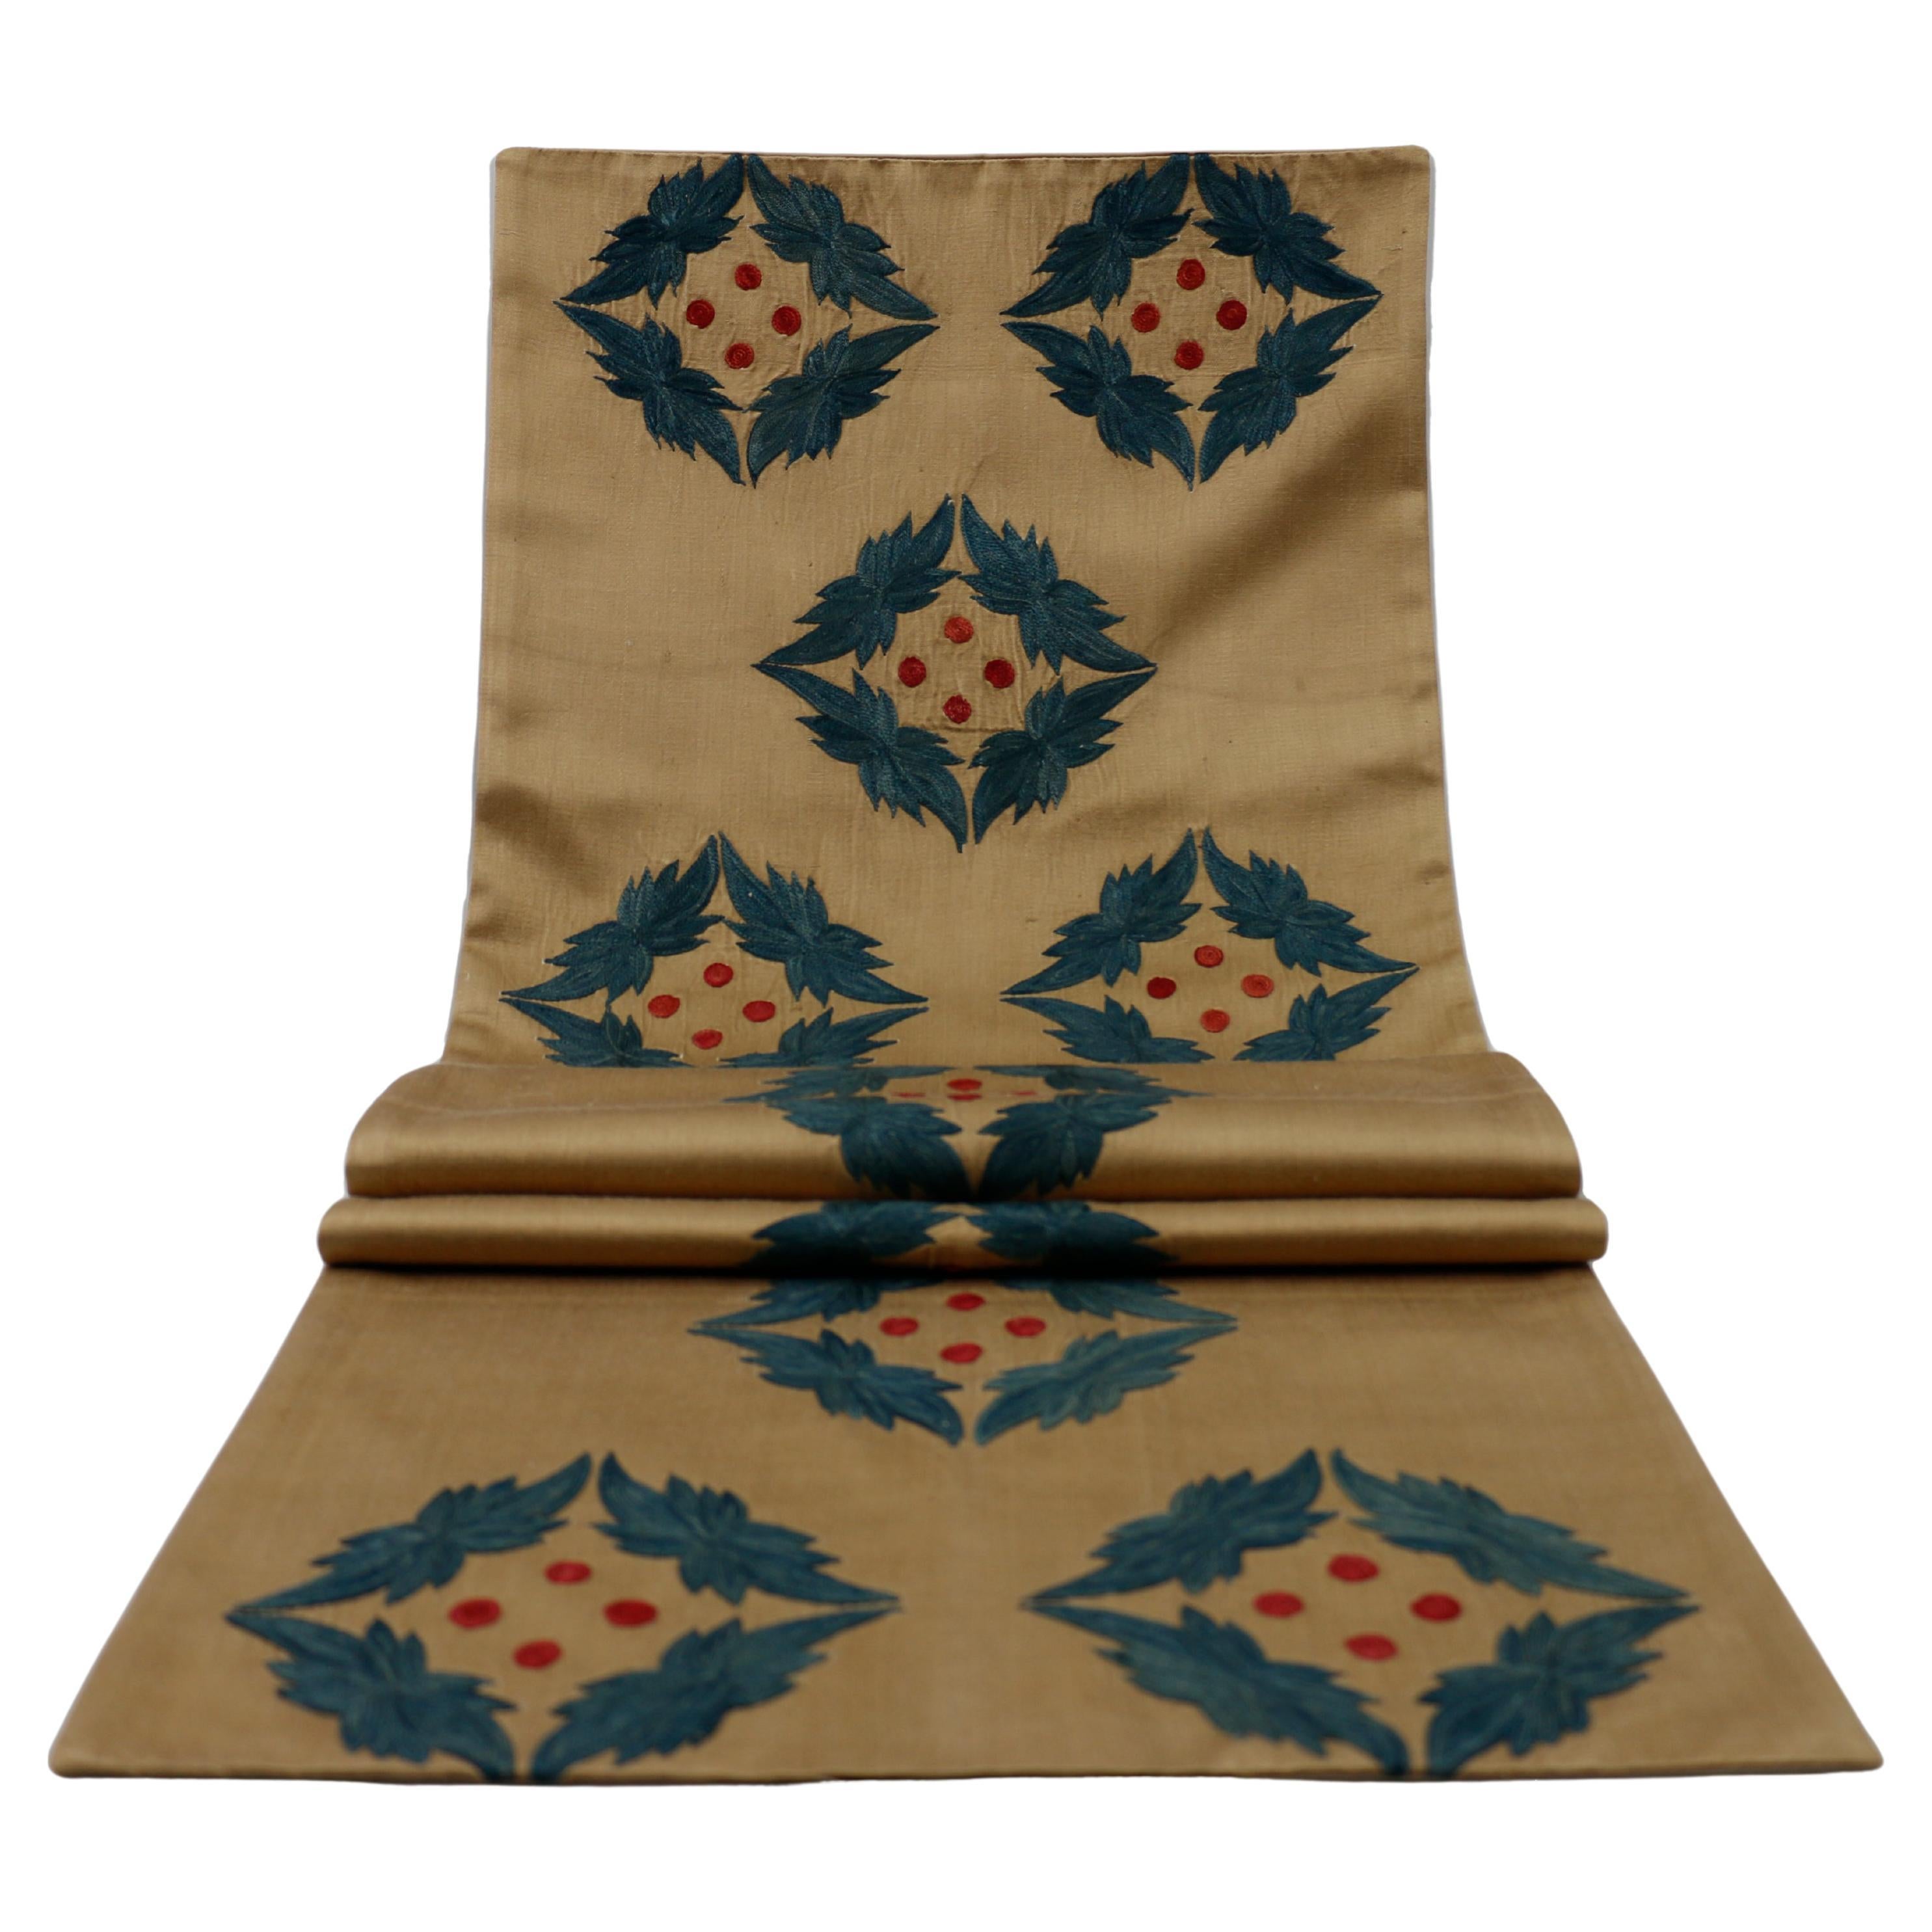 Ottoman Antique Suzani Silk Hand Embroidered Runner (Early 20th Century) For Sale